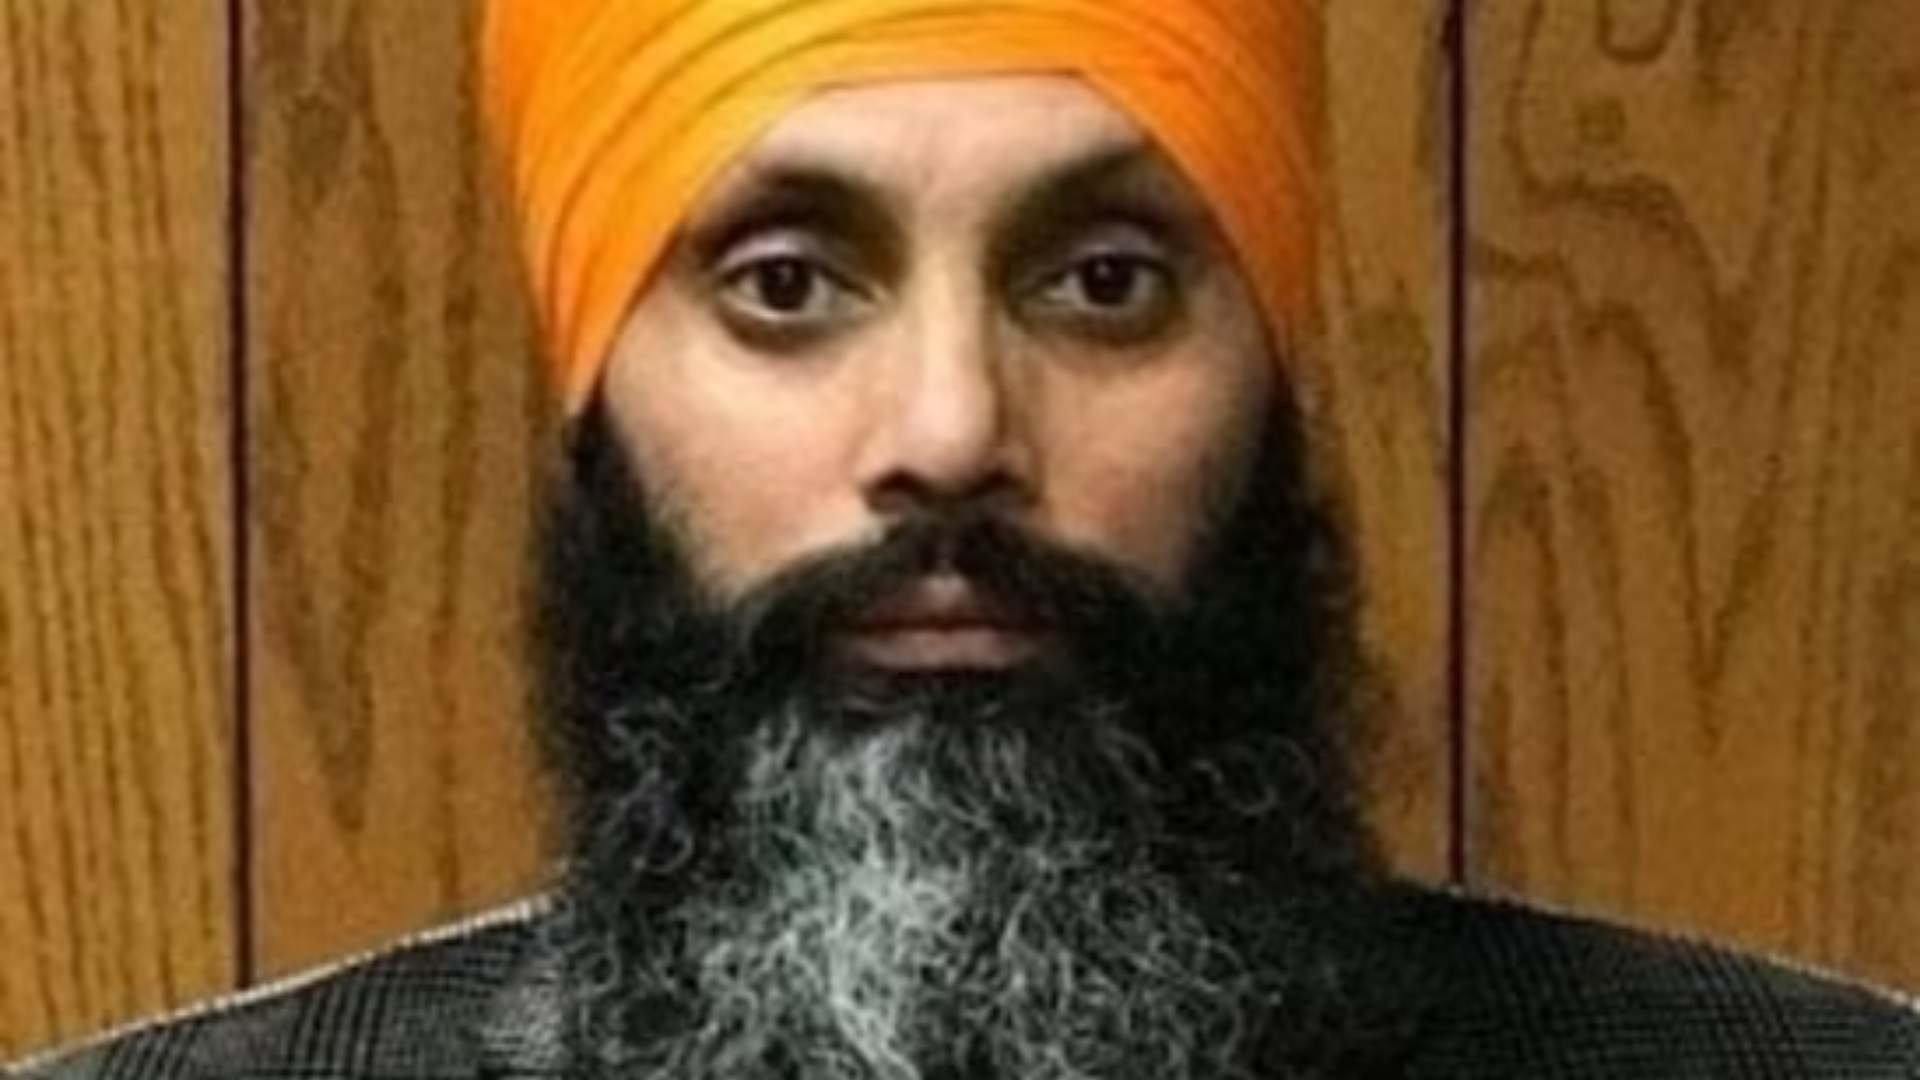 Fourth Suspect Arrested in Connection with Hardeep Singh Nijjar’s Killing in Canada